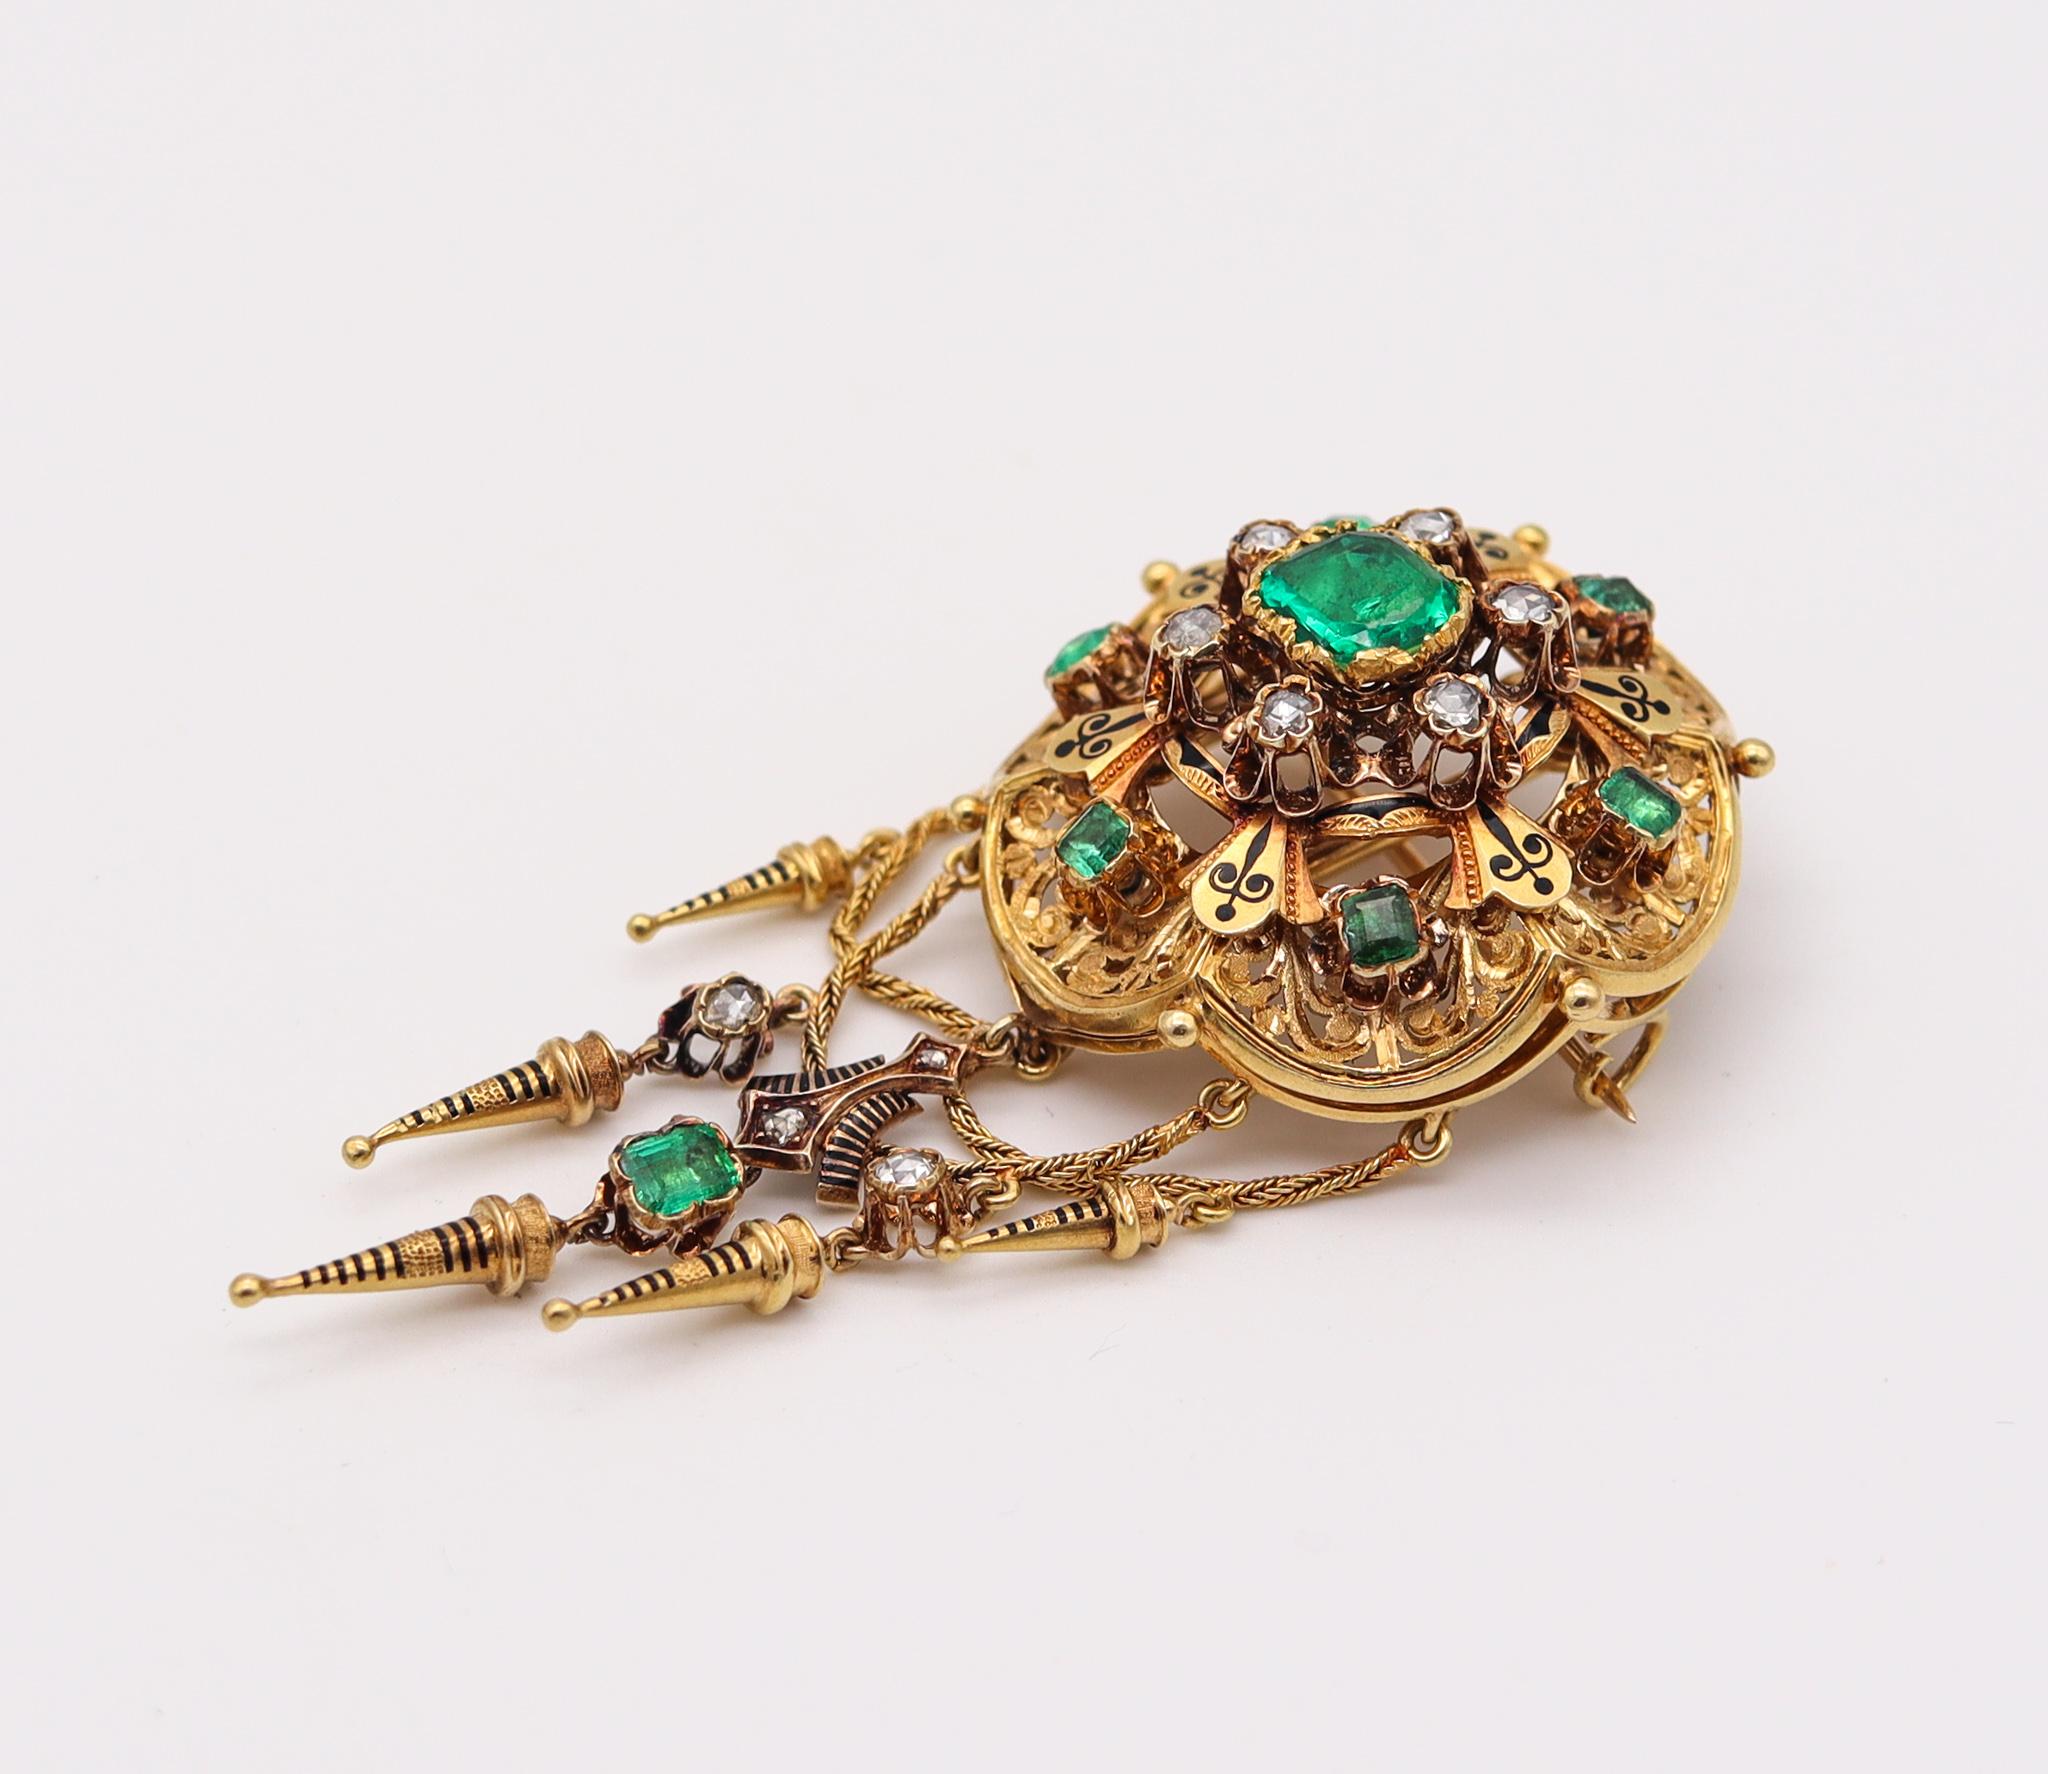 Georgian convertible brooch and pendant.

Magnificent antique piece, created in the United Kingdom during the Georgian period, circa 1810. This is a convertible pendant brooch with gemstones and It was carefully crafted in solid yellow gold of 18